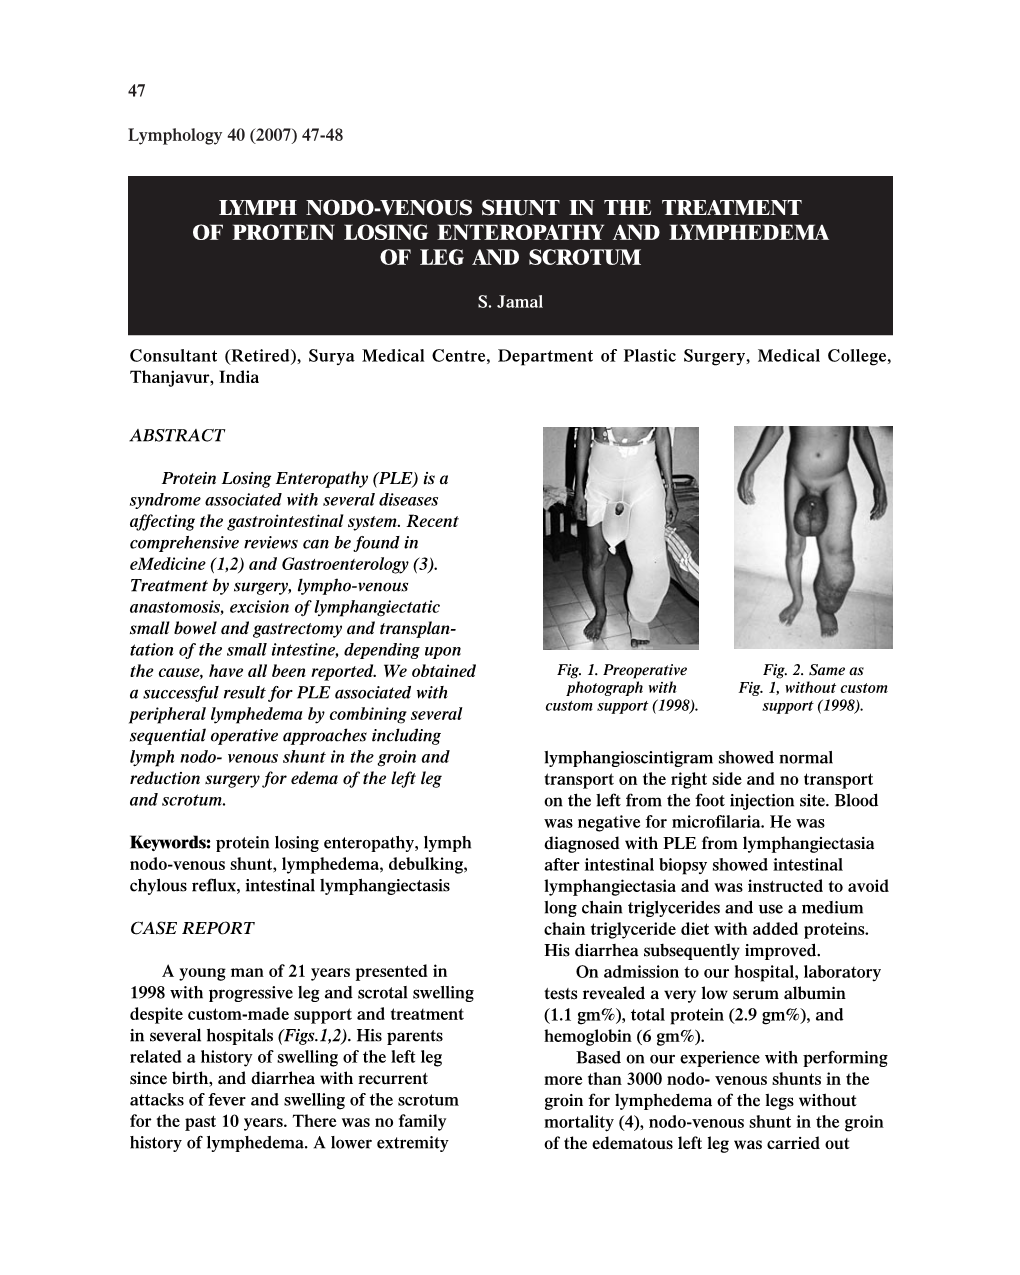 Lymph Nodo-Venous Shunt in the Treatment of Protein Losing Enteropathy and Lymphedema of Leg and Scrotum